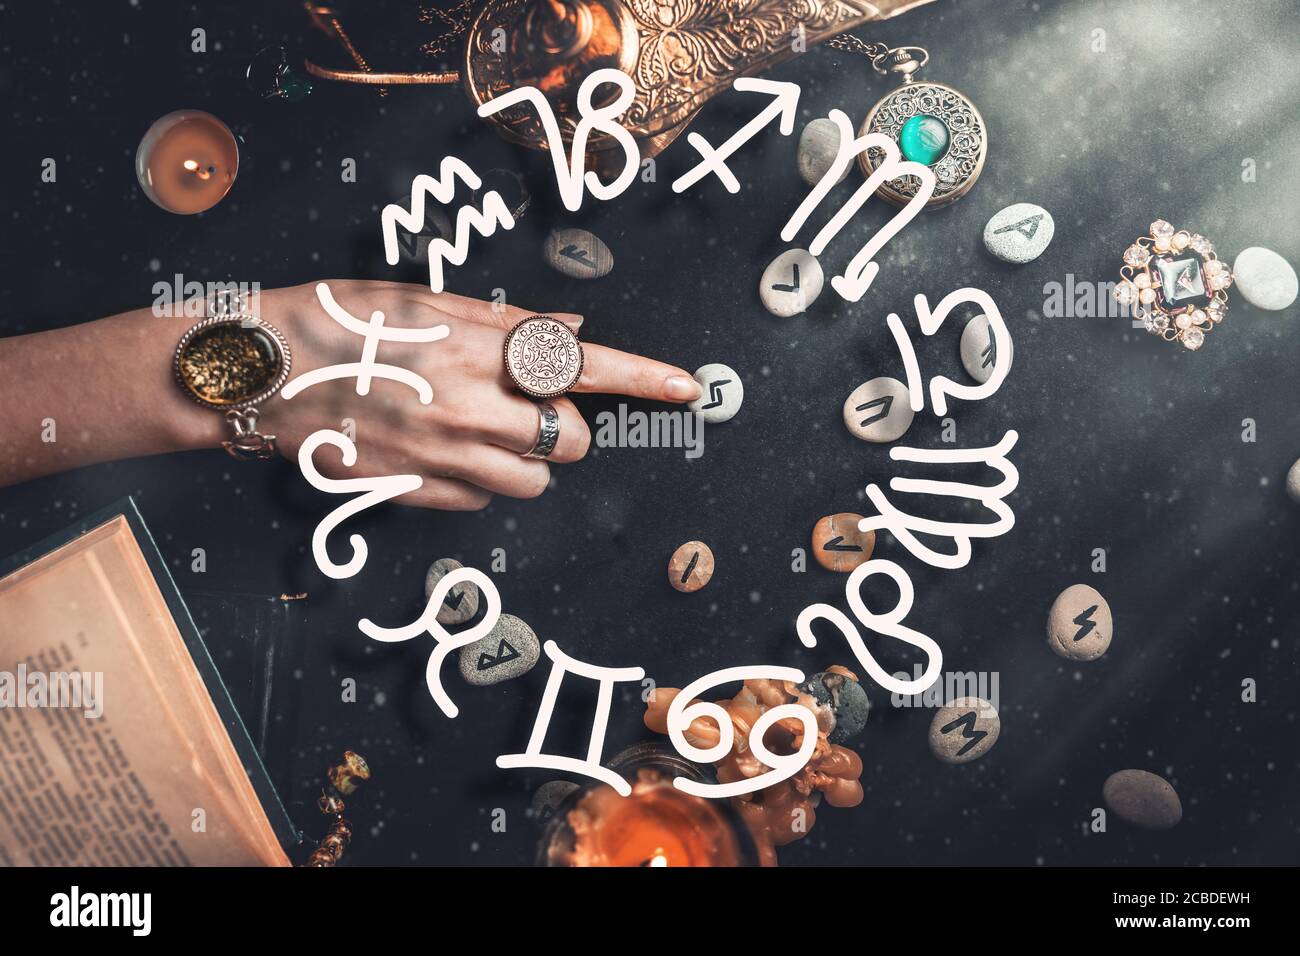 rune stones with black symbols for fortune telling Stock Photo - Alamy